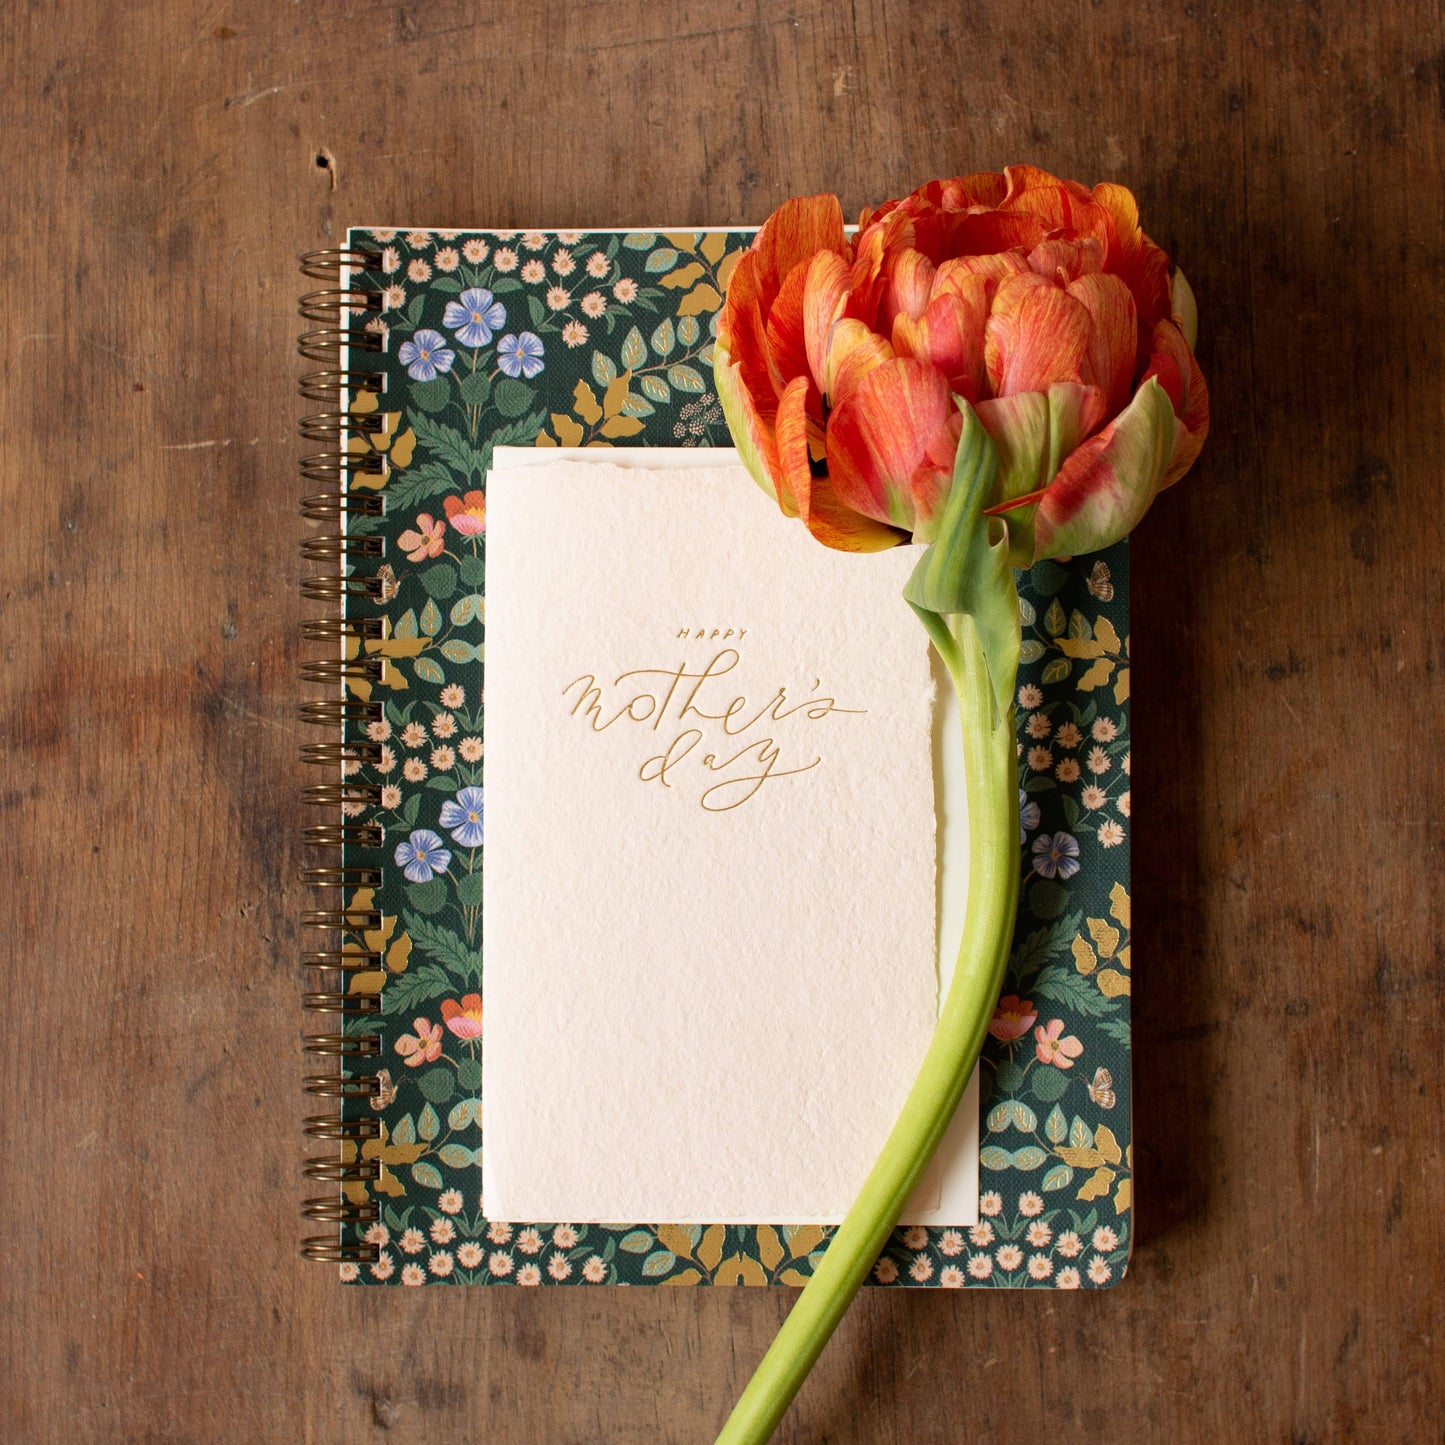 Mother's Day Calligraphy Note Handmade Paper Letterpress